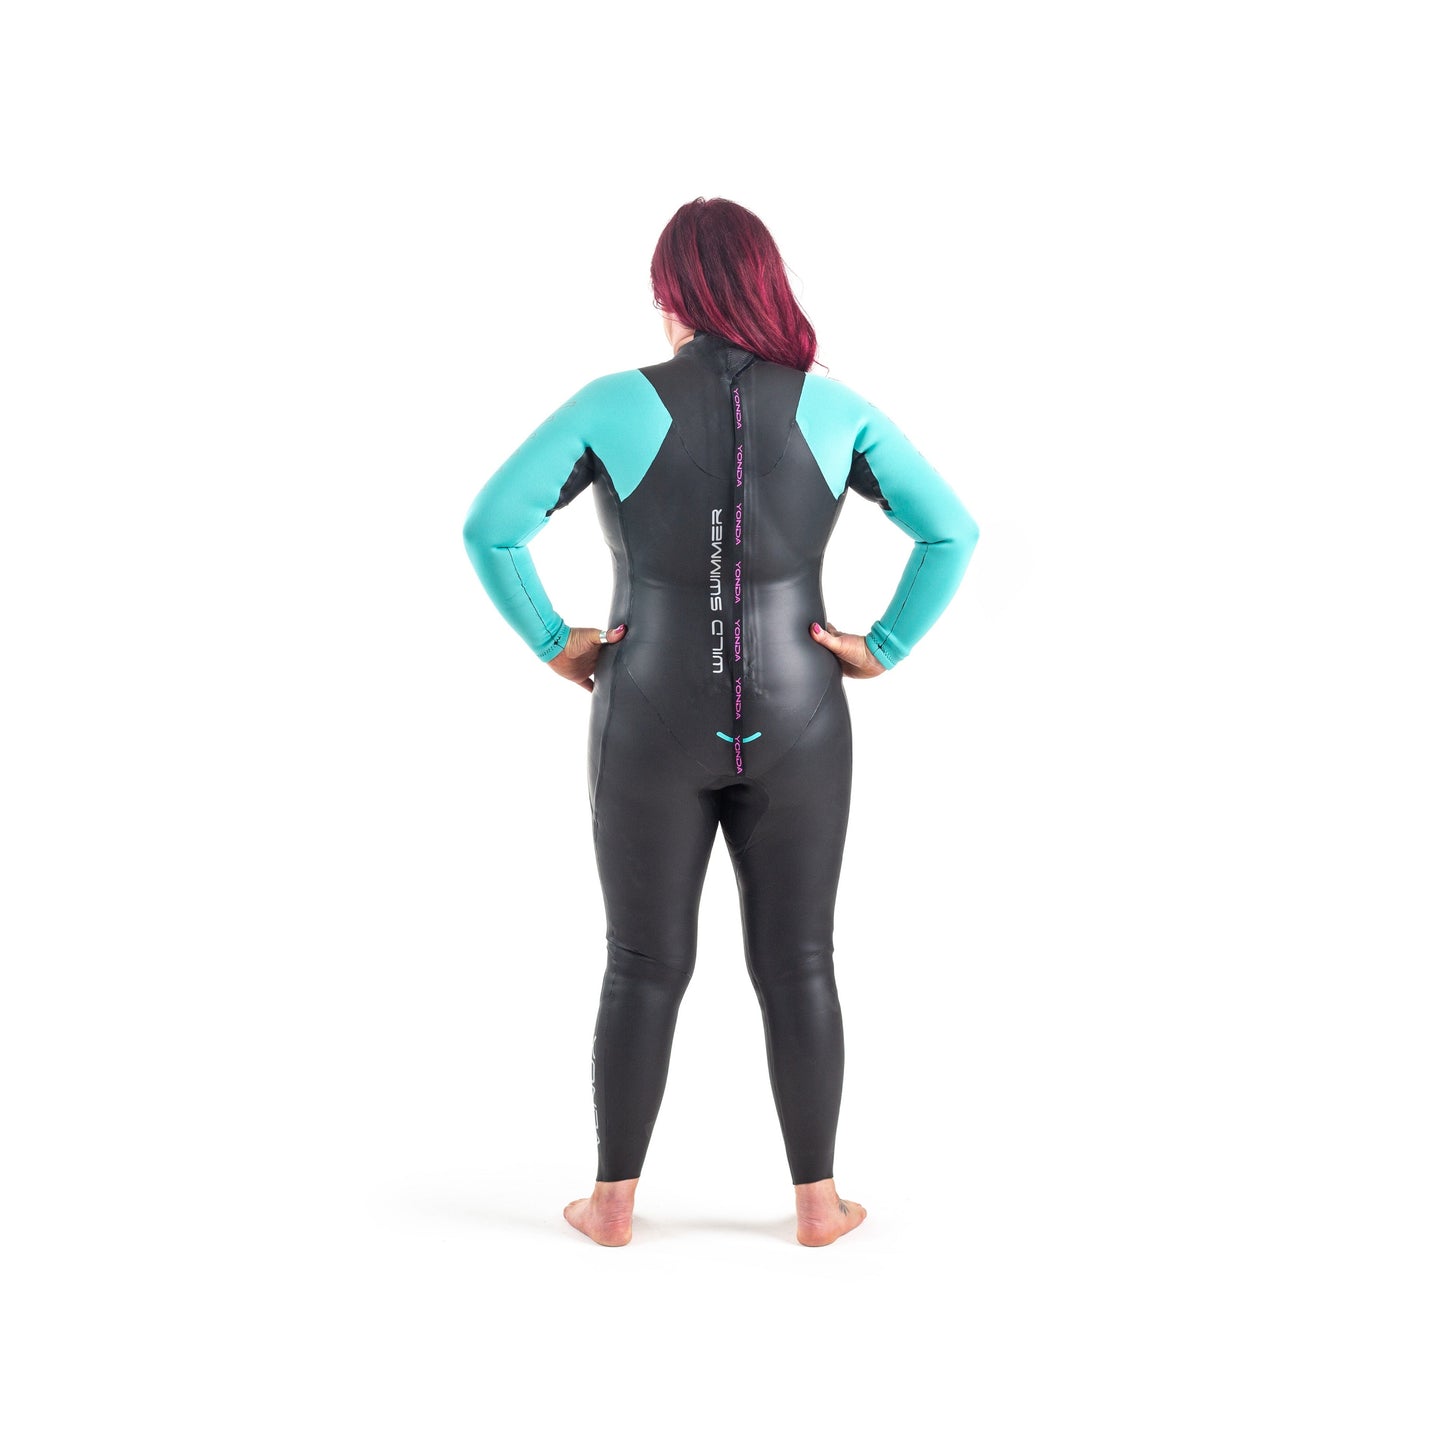 Back view of a women standing in a Spook Wetsuit by Yonda, with hands on hips. The Womens Open Water Swimming Wetsuit is black with aqua arms.